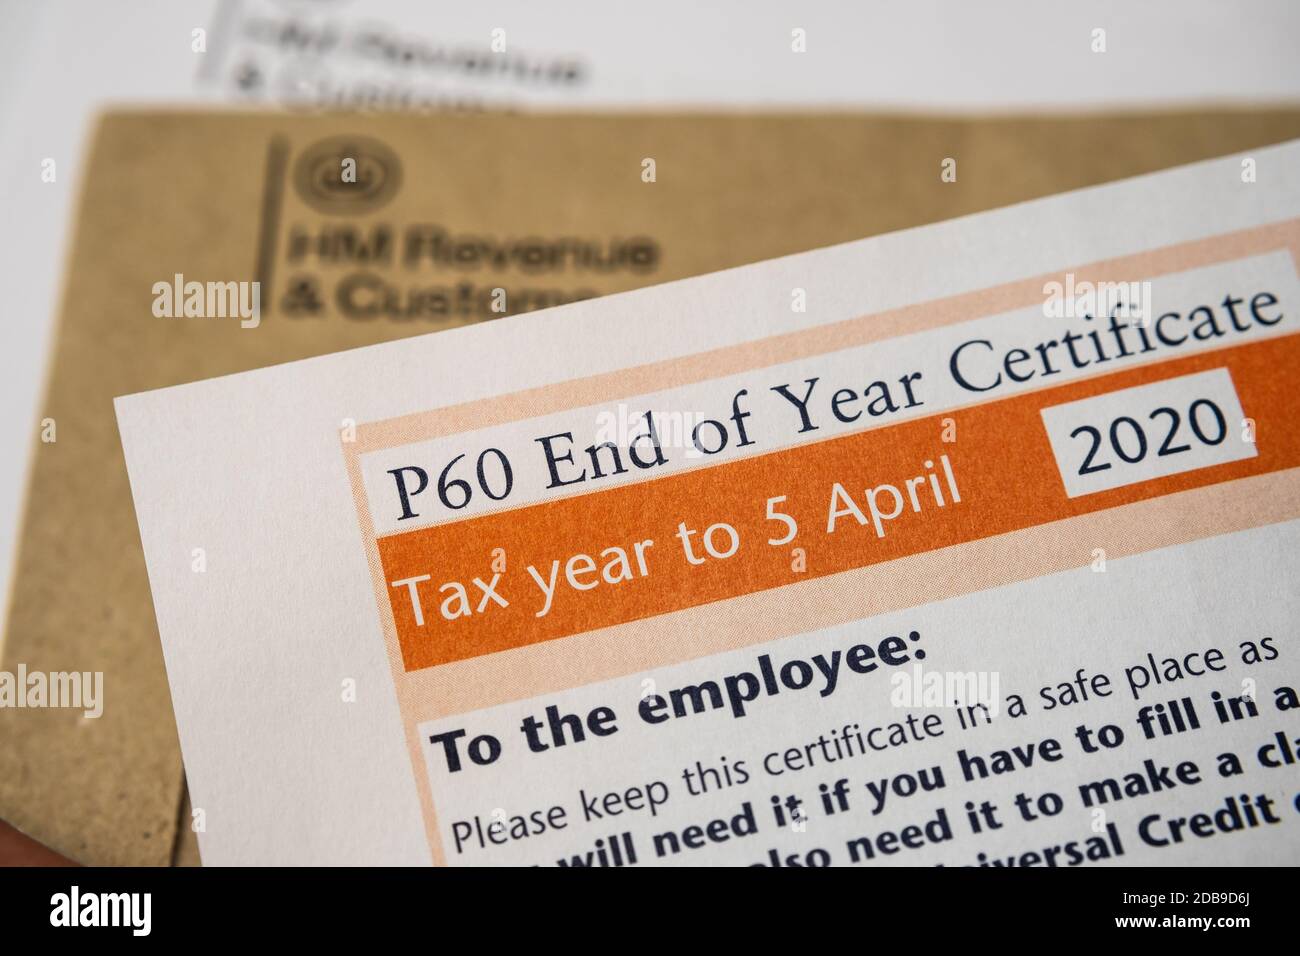 Stafford / United Kingdom - November 16 2020: HM Revenue & Customs (HMRC) P60 End of year certificate letter seen with blurred envelopes on the backgr Stock Photo